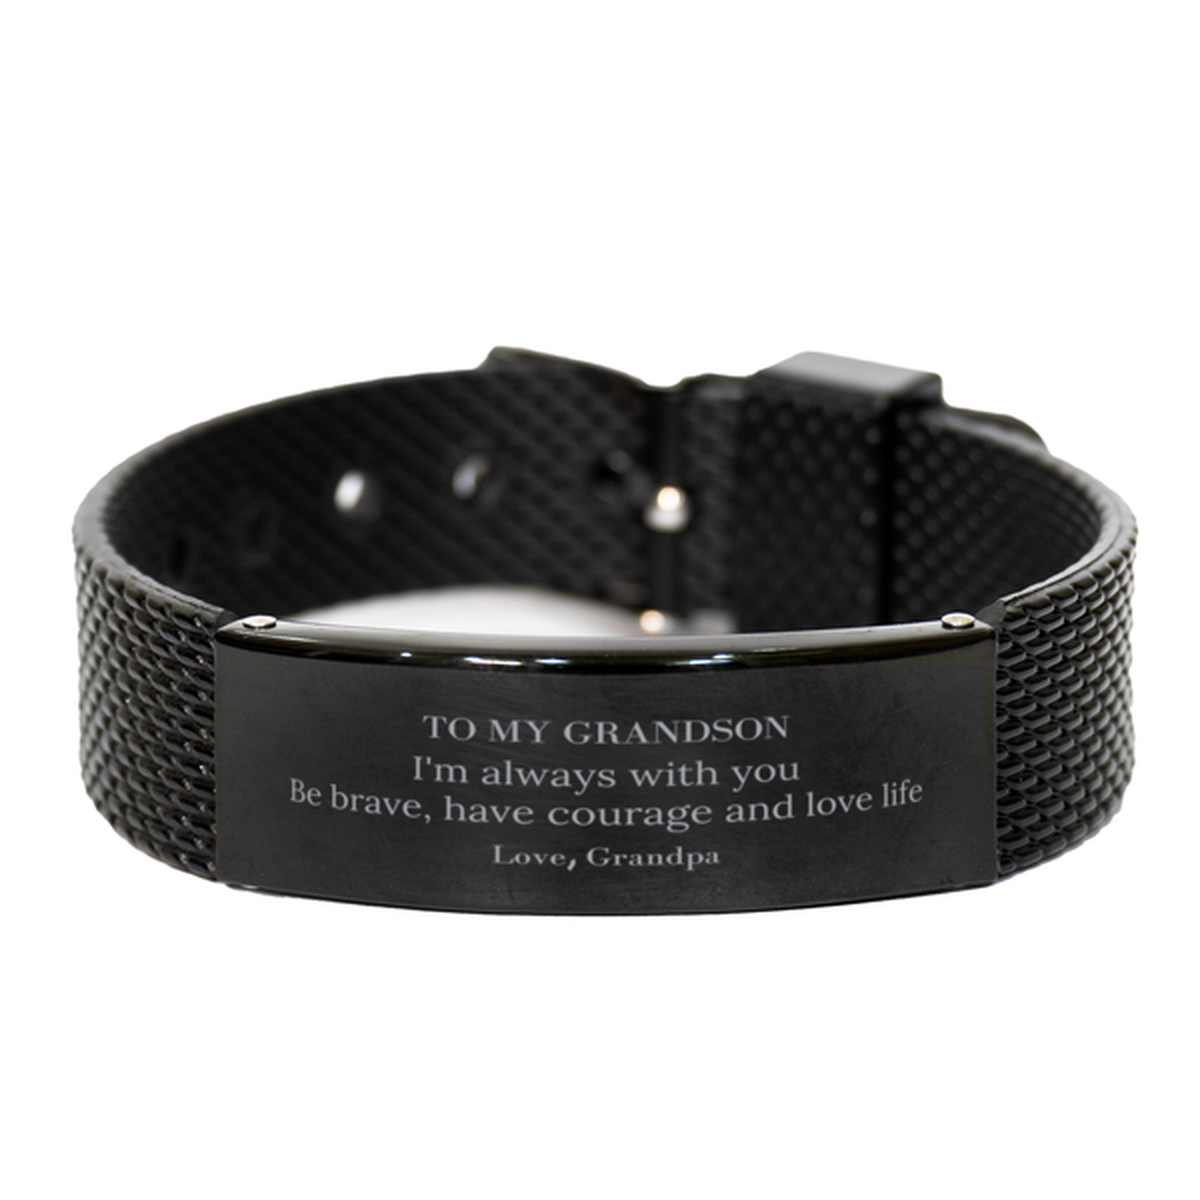 To My Grandson Gifts from Grandpa, Unique Black Shark Mesh Bracelet Inspirational Christmas Birthday Graduation Gifts for Grandson I'm always with you. Be brave, have courage and love life. Love, Grandpa